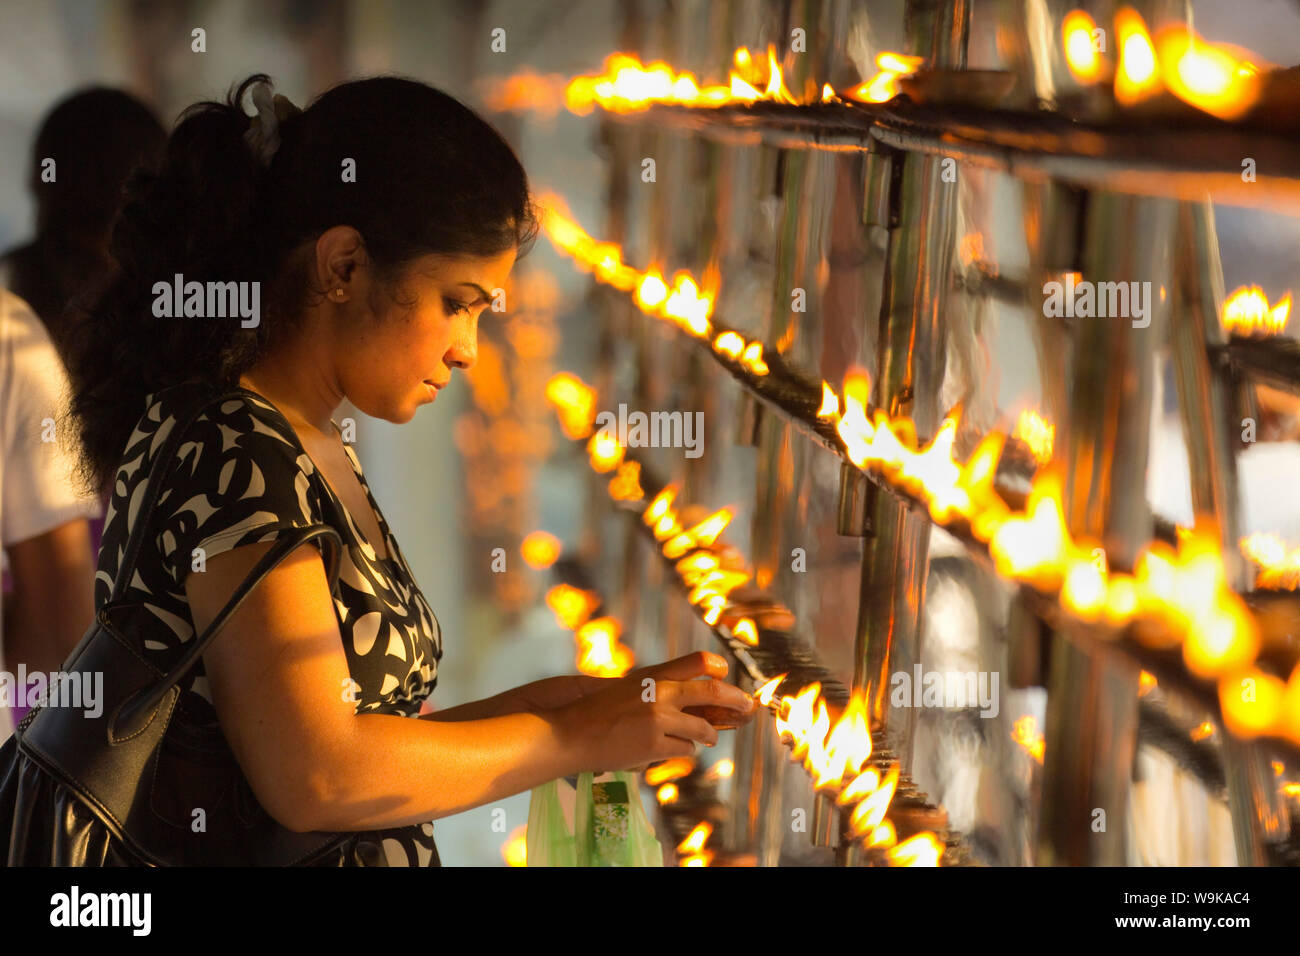 Devotee lighting candles at sunset in the Temple of the Sacred Tooth Relic (Temple of the Tooth), site of Buddhist pilgrimage, Kandy, Sri Lanka, Asia Stock Photo